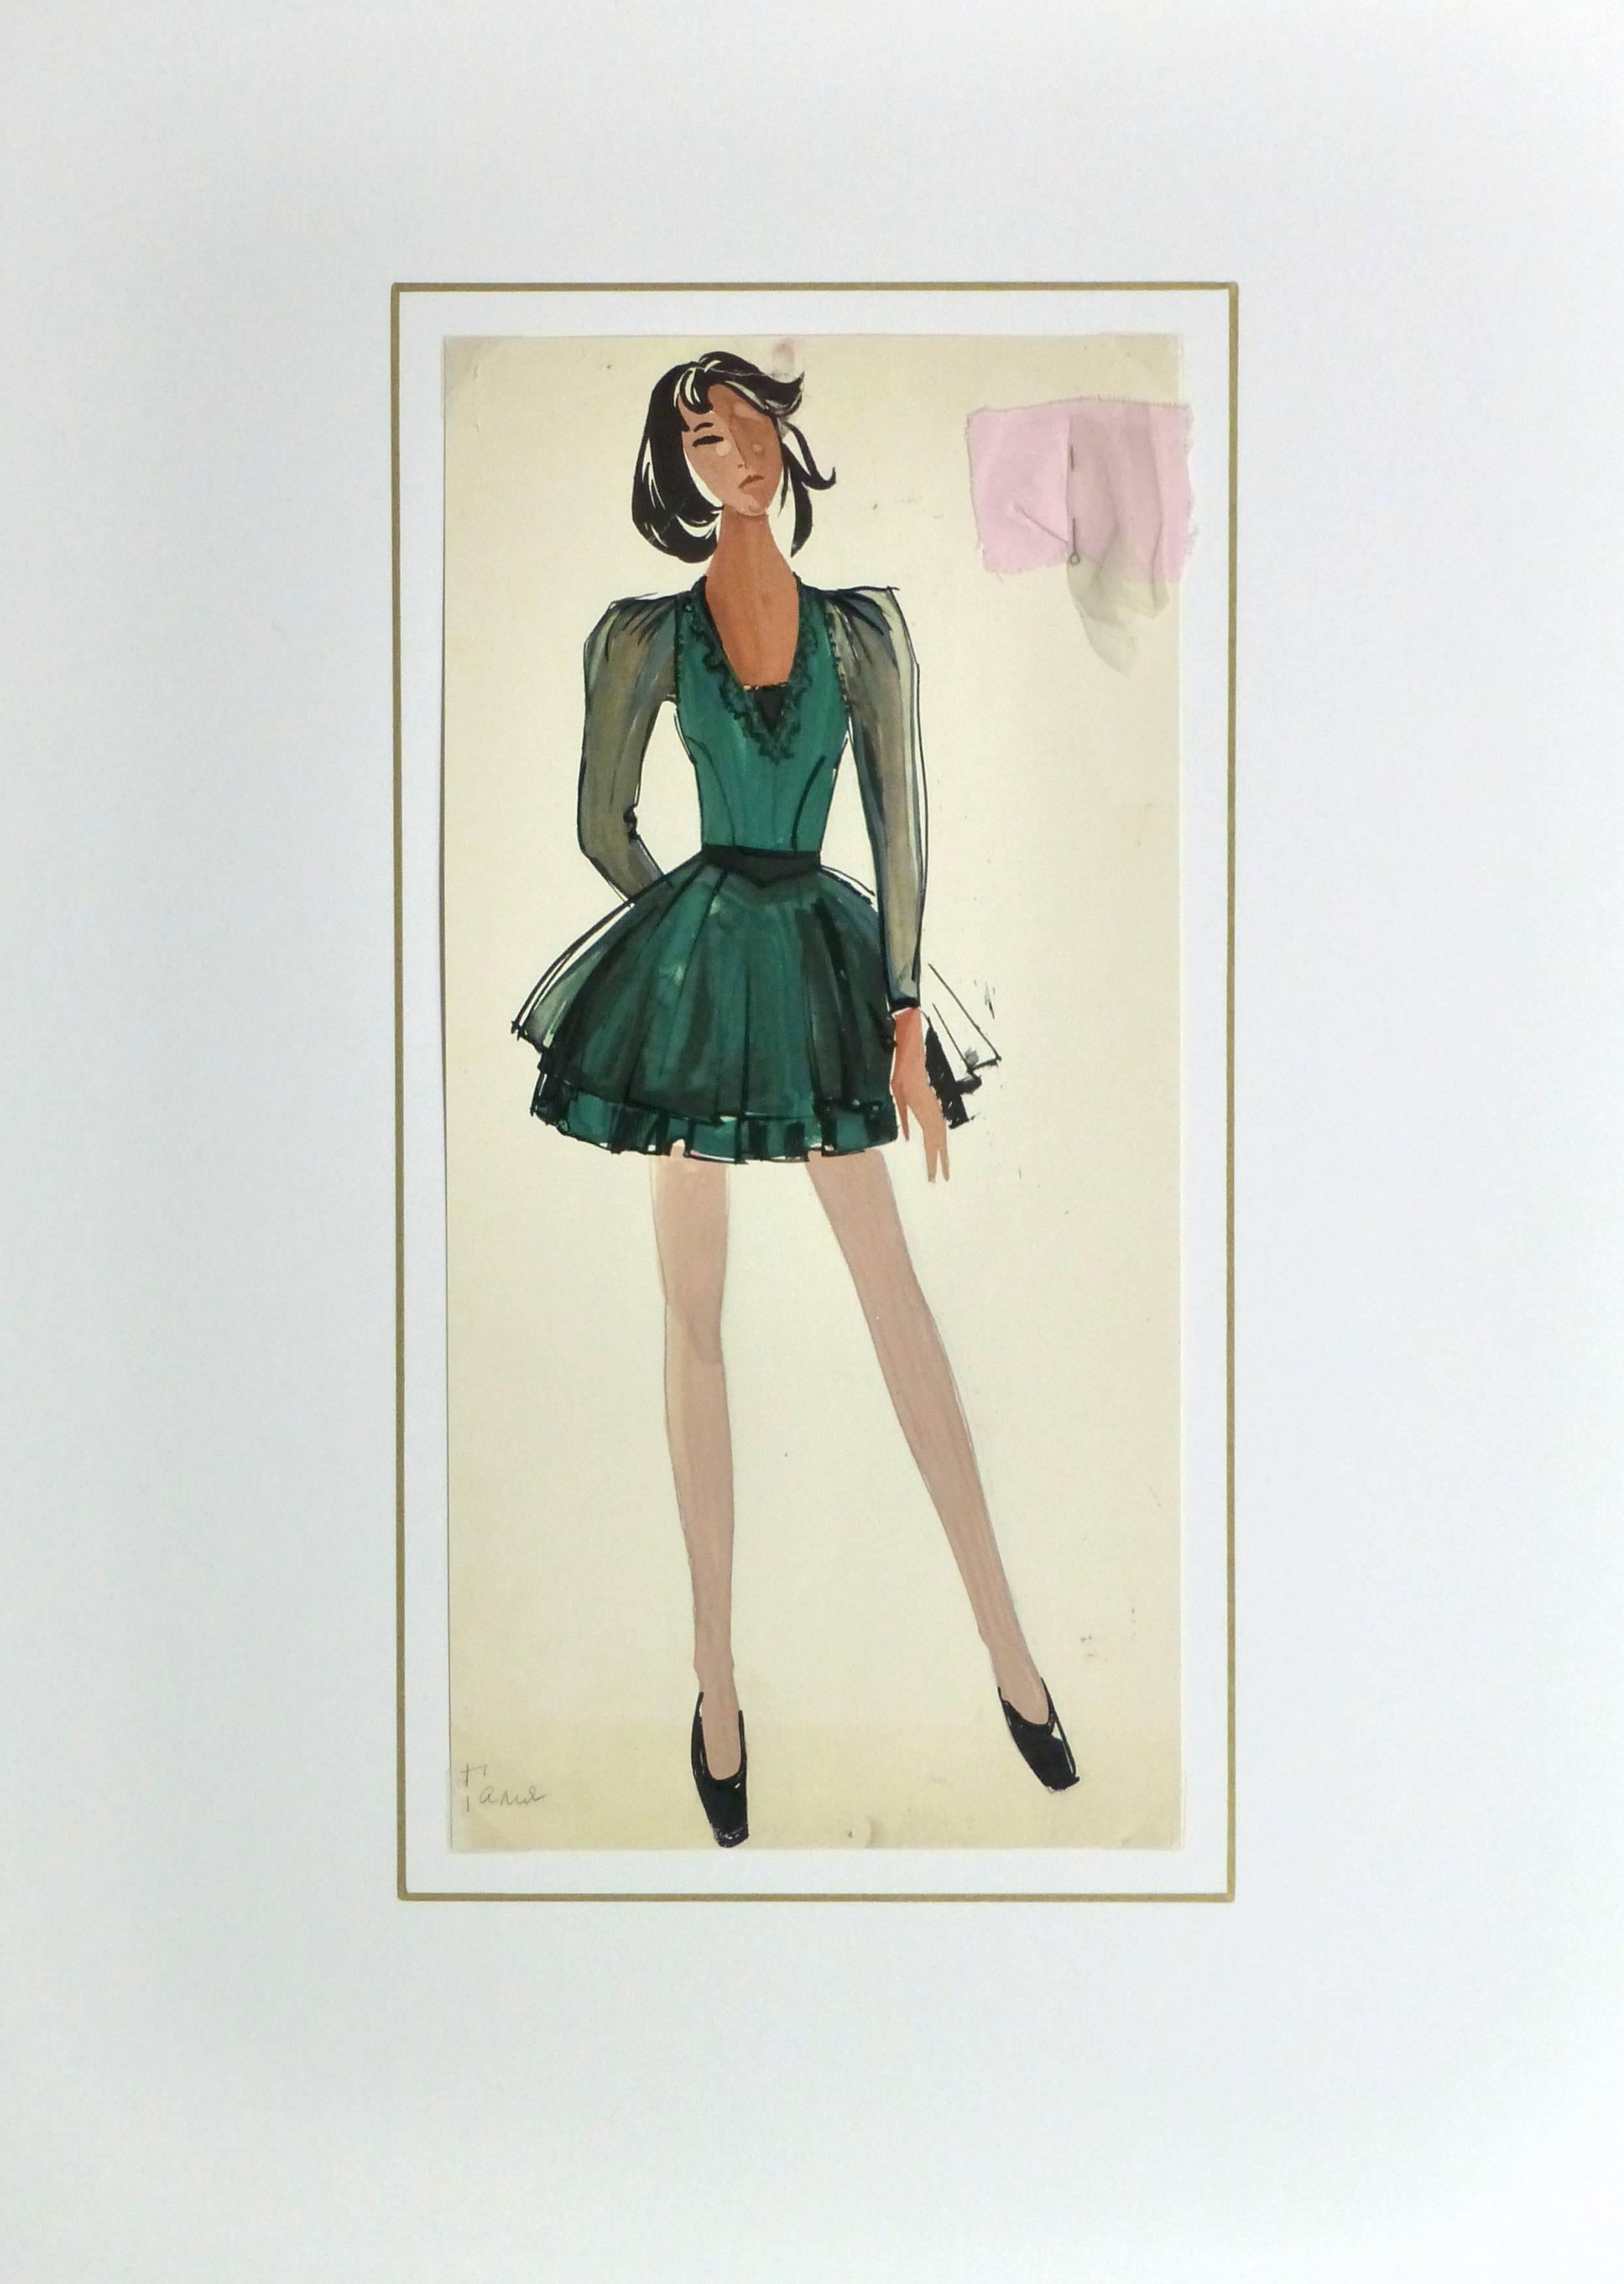 Delightful gouache fashion sketch of a ballerina style dress in a deep forest green. Fabric swatch attached upper right. Signiert unten links.

Original artwork on paper displayed on a white mat with a gold border. Archival plastic sleeve and